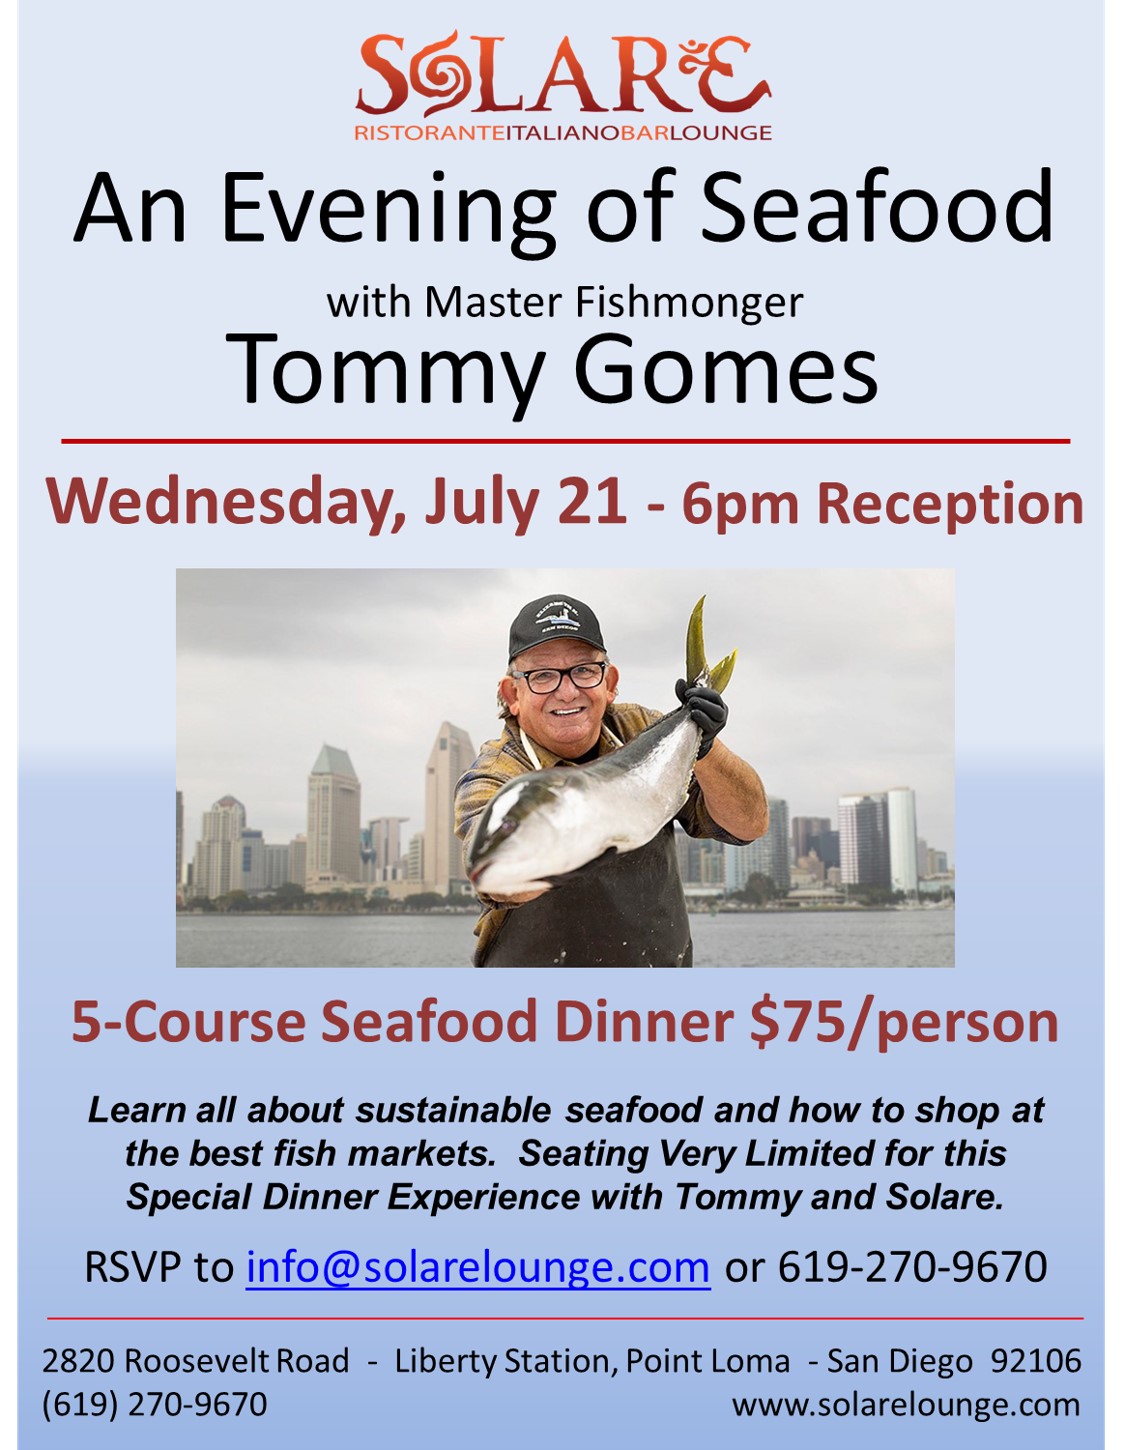 <a id="Solare-Seafood-TommyGomes-Dinner"></a>Tommy Gomes - An Evening of Seafood Night 2<span style="color: black;">- Sold Out</span>